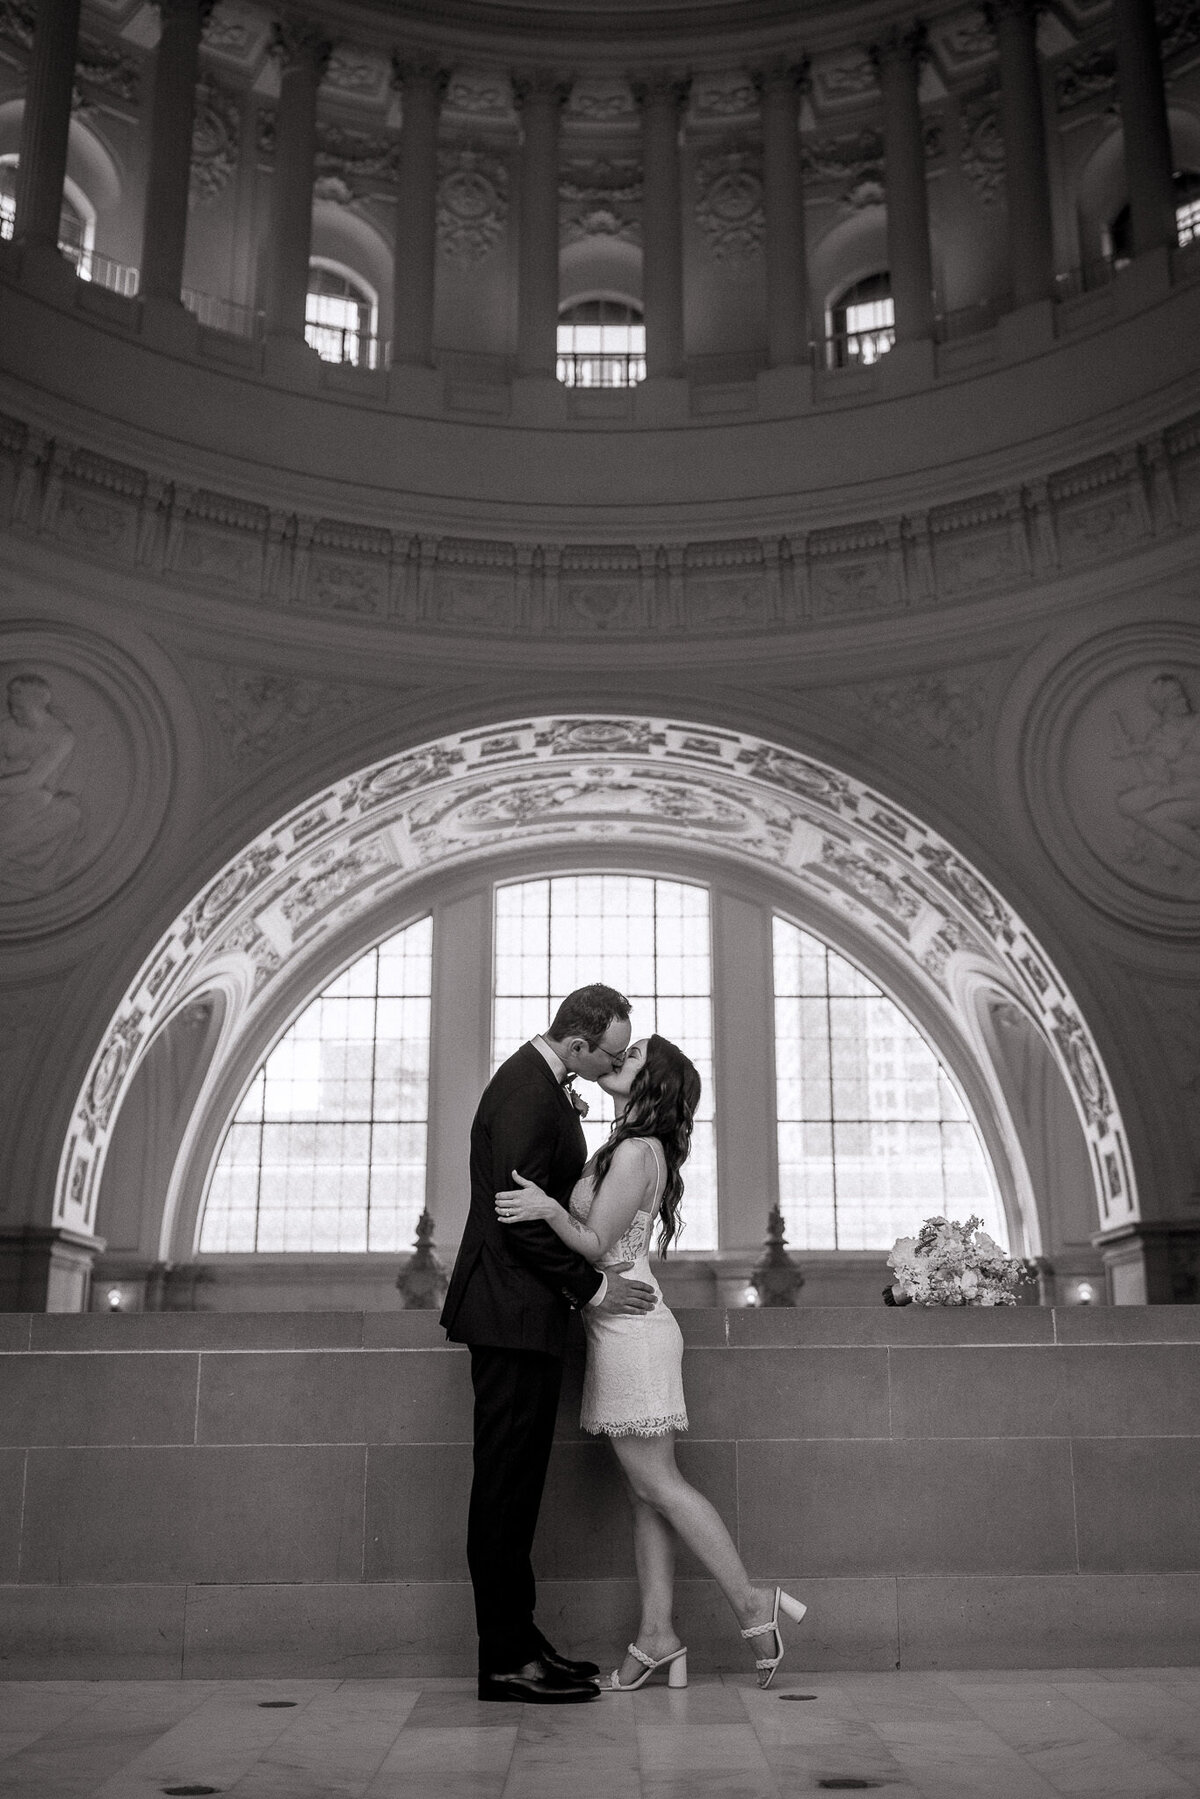 Wedding couple kissing at San Francisco City Hall after their elopement. They are framed in a semi circle window archway.